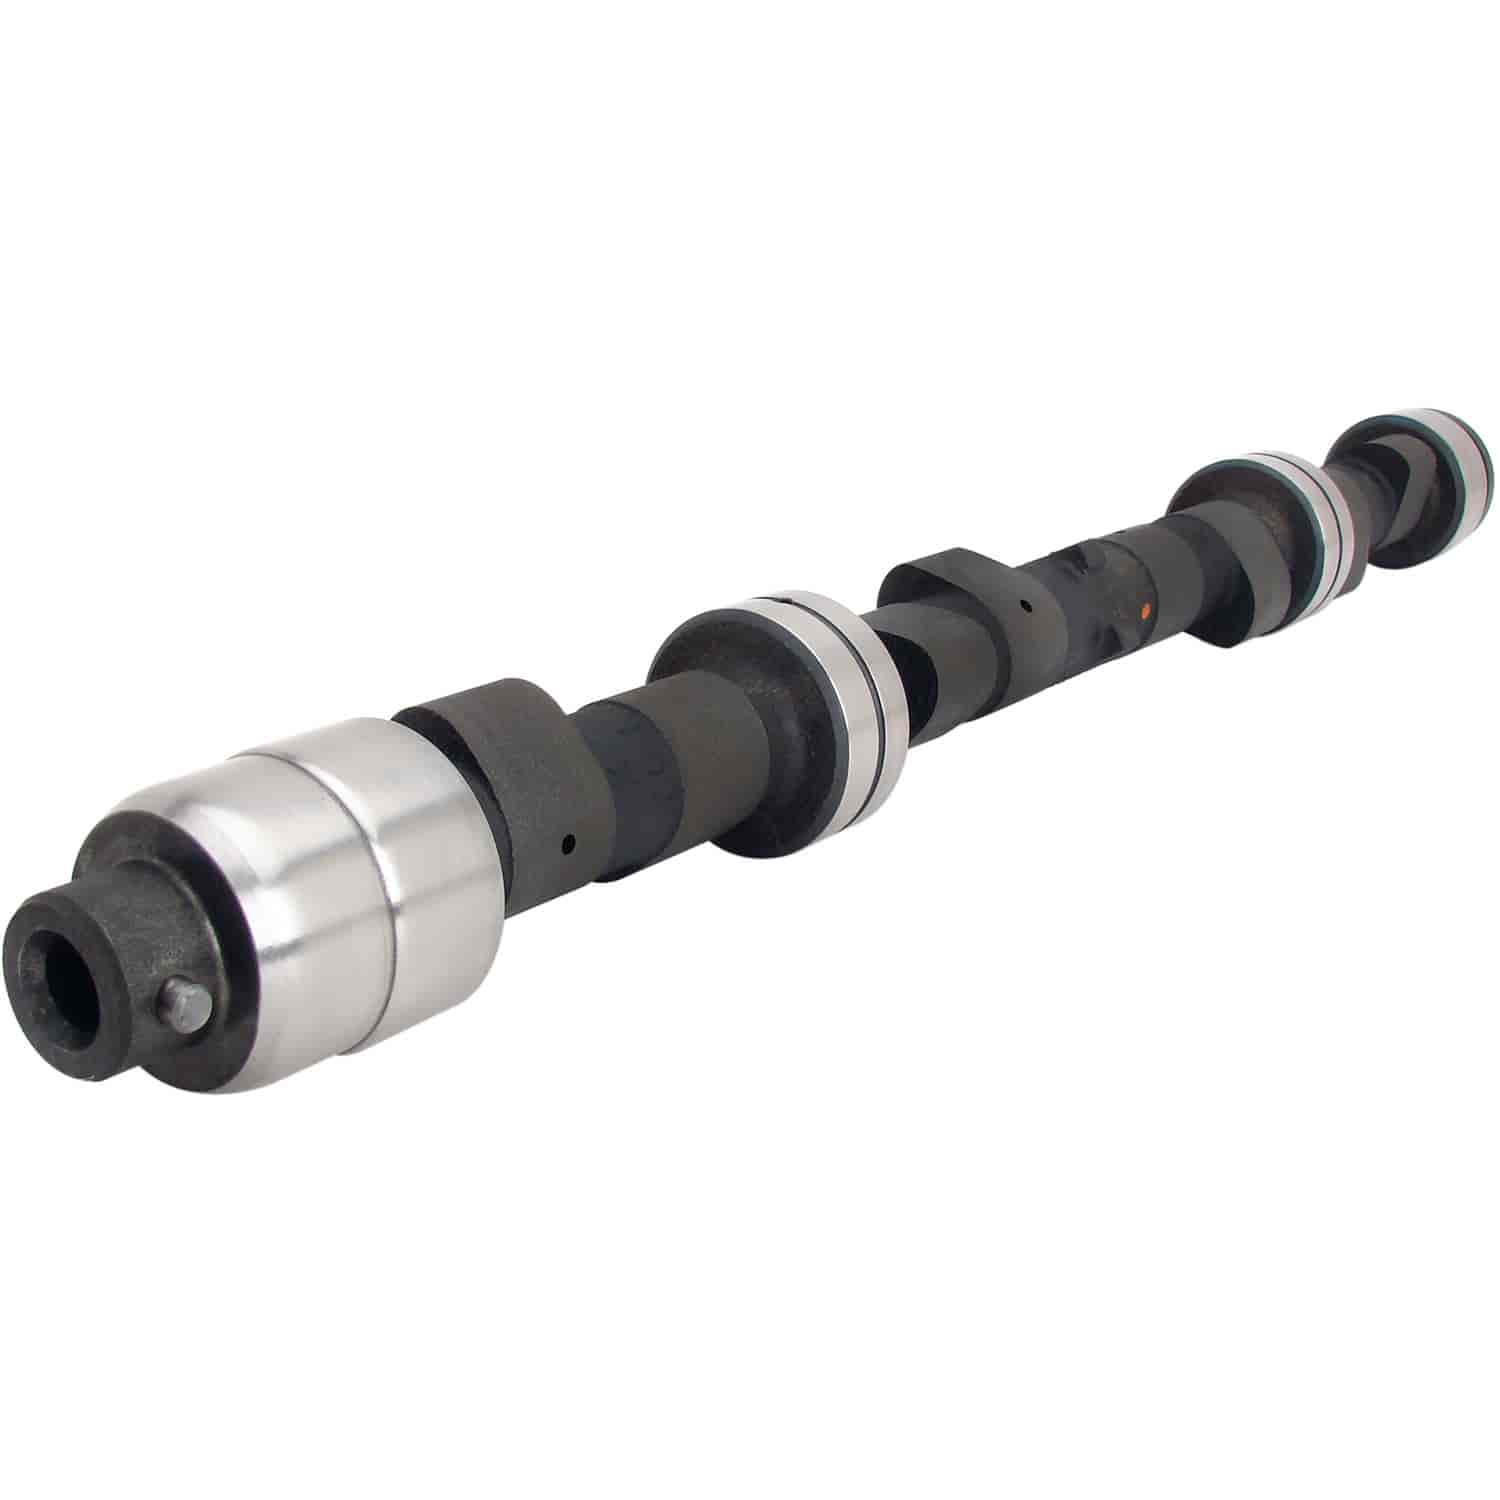 Oval Track Solid Flat Tappet Camshaft Ford 2000cc/2300cc